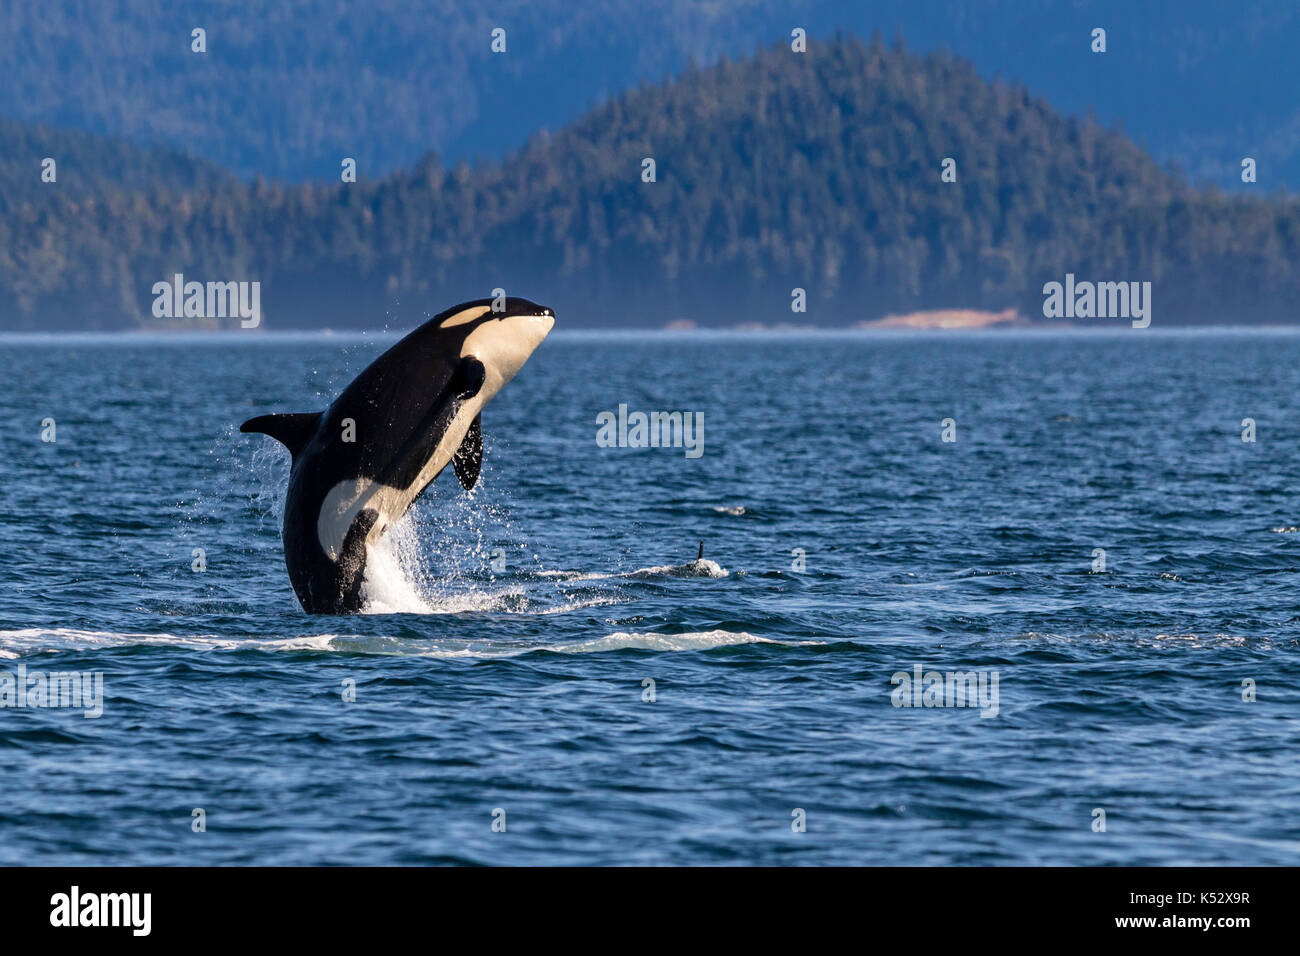 Northern resident killer whale breaching in front of Swanson Island off Northern Vancouver Island, British Columbia, Canada. Stock Photo